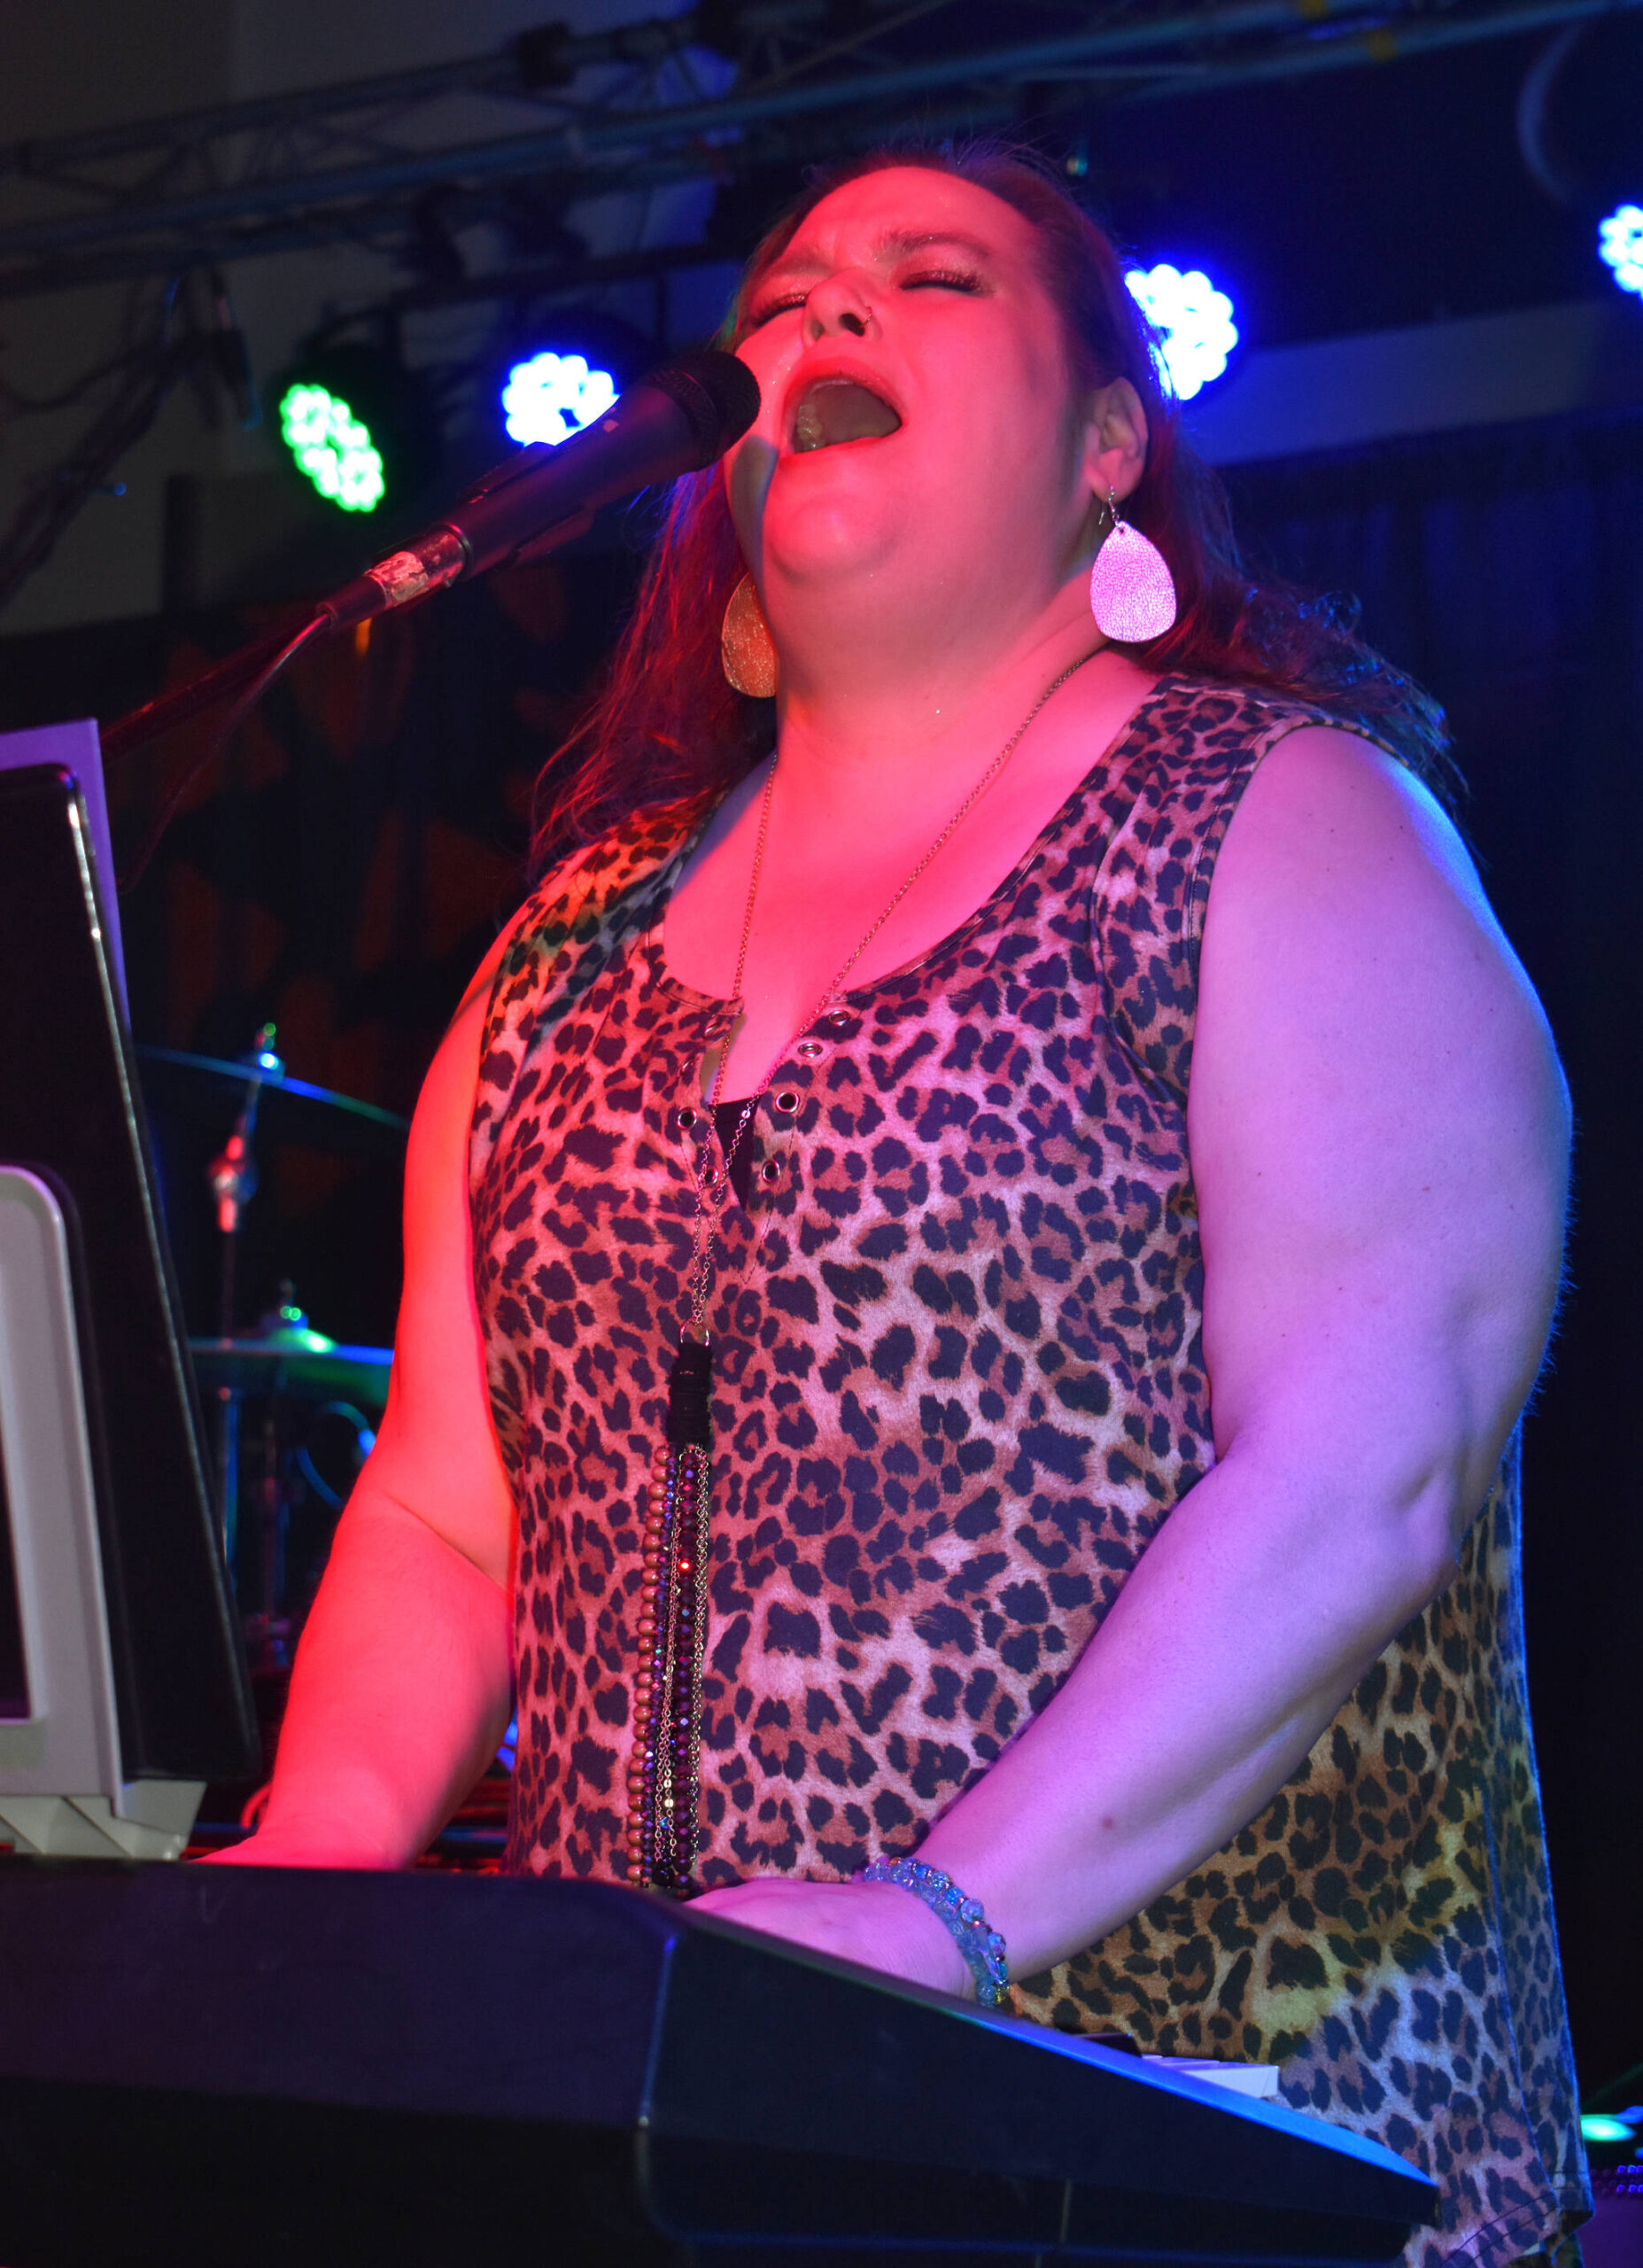 Tiffany Maki, singer and keyboardist for Ms. Maki & Co., belts out a lyric during her band's performance Saturday evening at Celebrate Summer Jam at Ocean Shores Convention Center. Maki made sure the crowd, and her bandmates, know how appreciative she is of the stellar work they did on stage. (Matthew N. Wells / The Daily World)